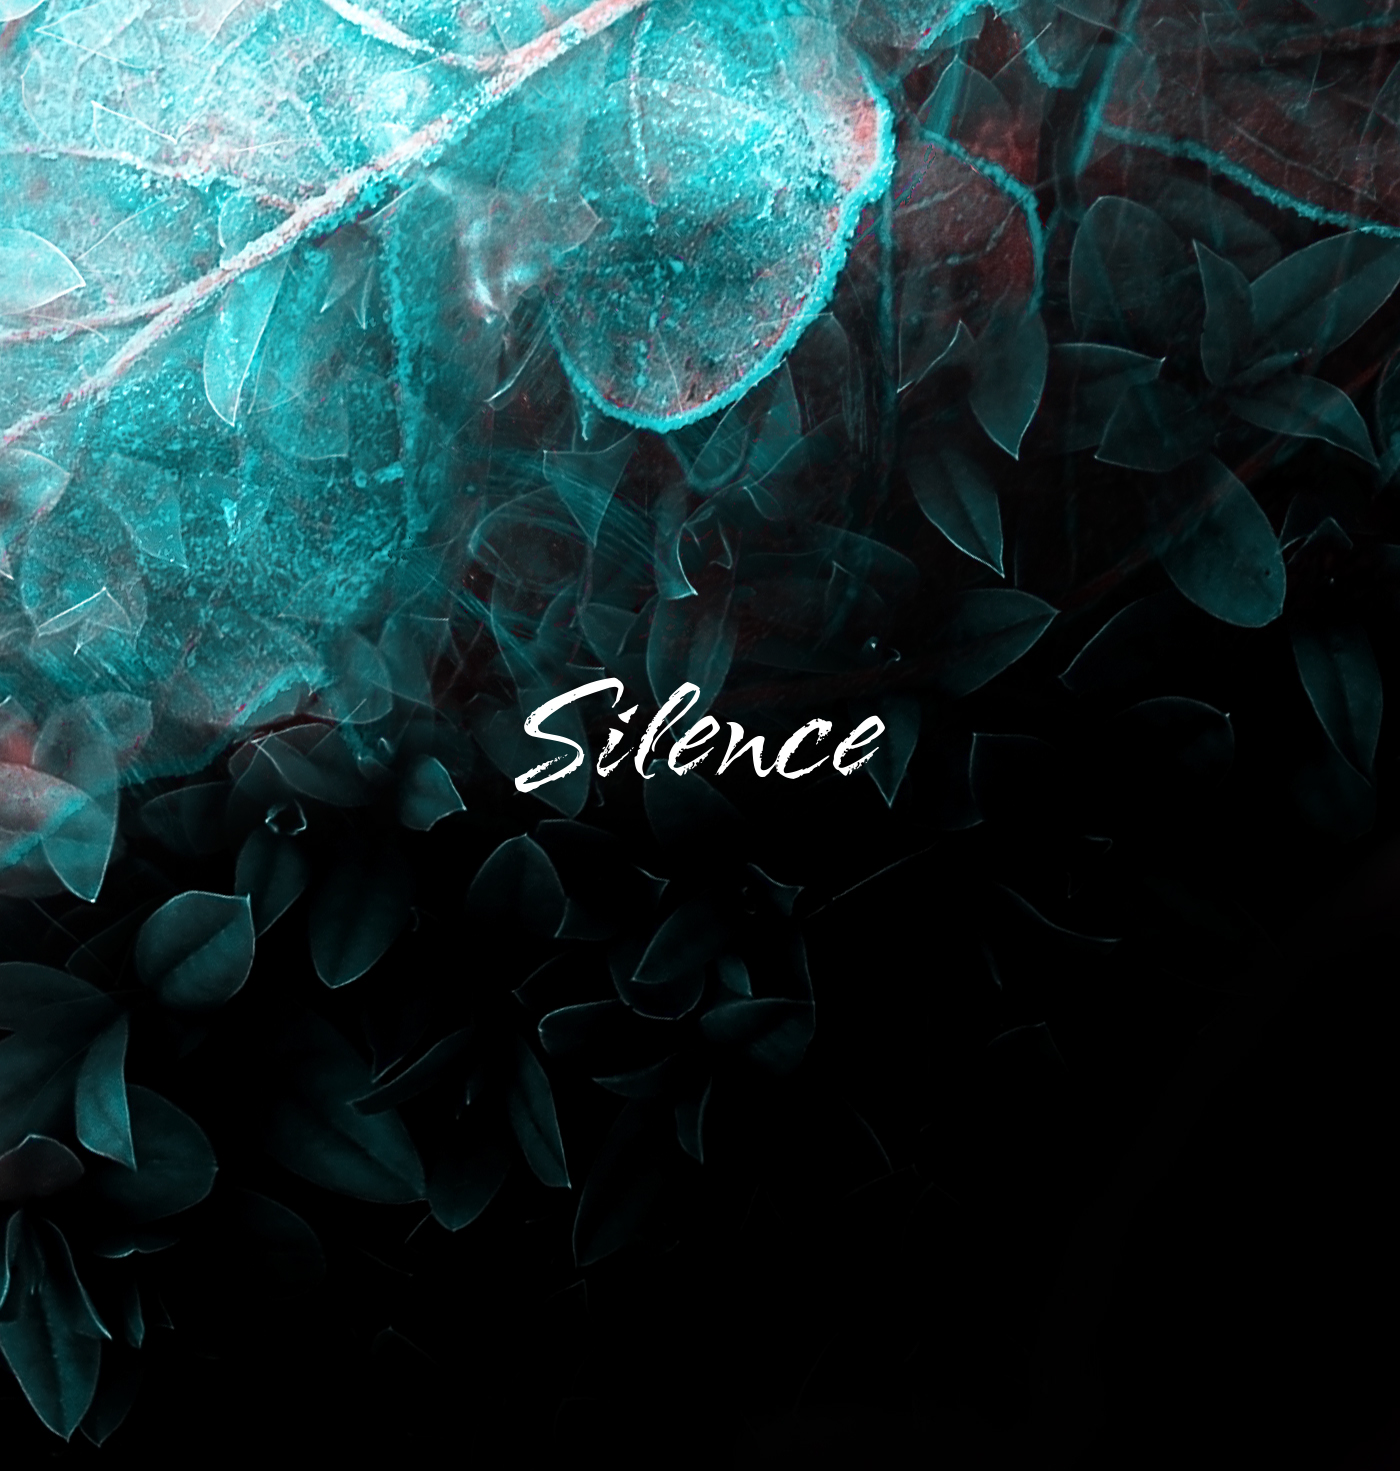 silence adobe photoshop art blue red iManipulate PS graphic design  ILLUSTRATION 